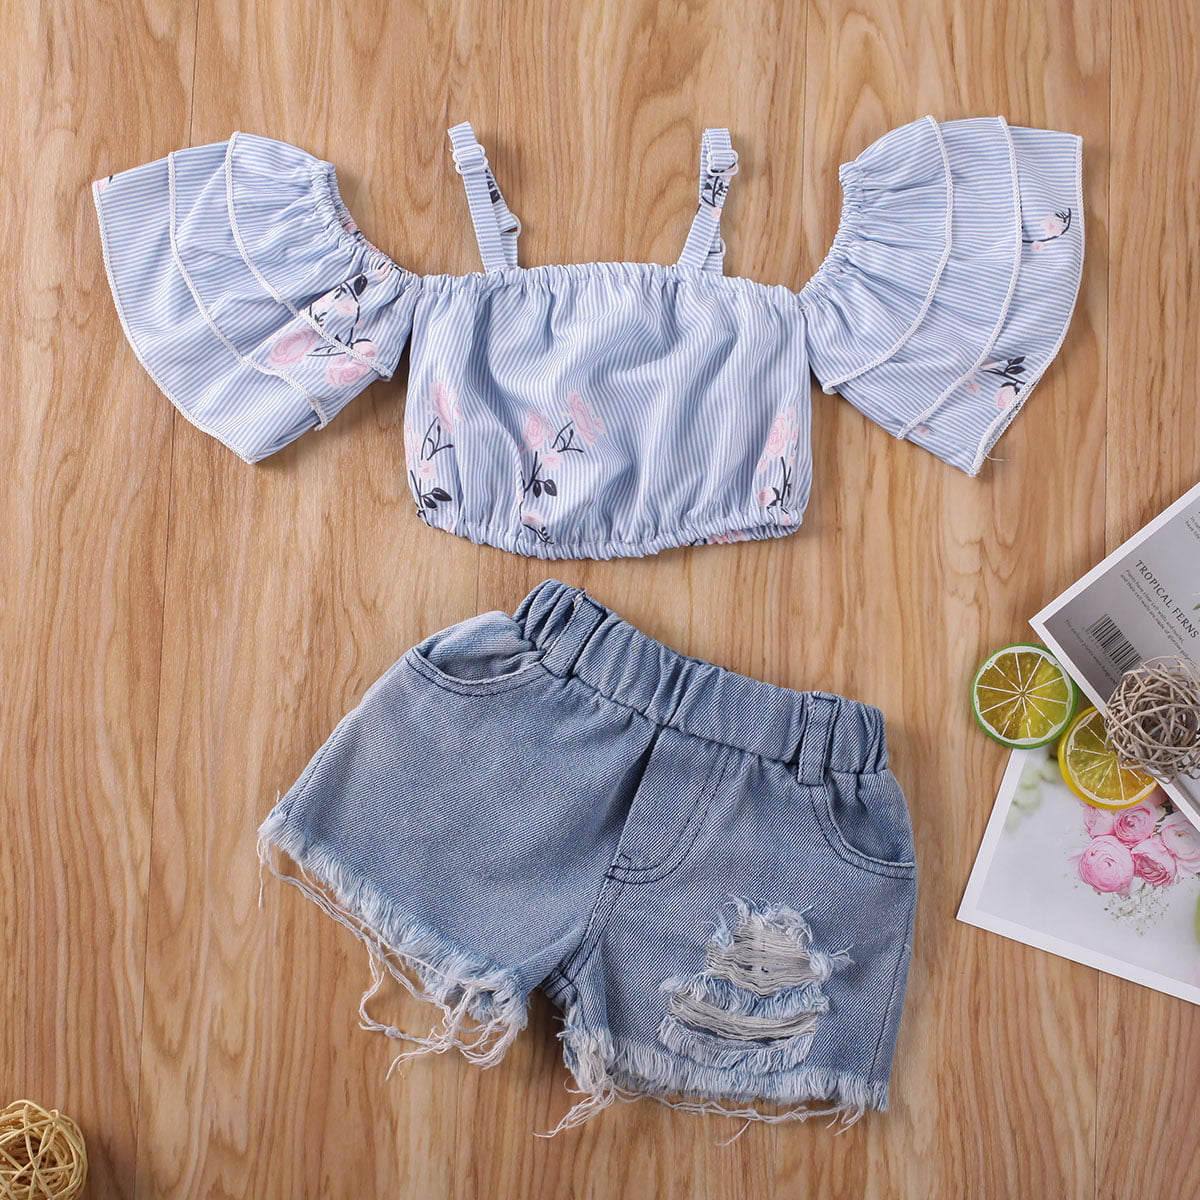 Little Baby Girls Top+Denim Ripped Shorts Kids Summer Outfit Newborn Casual Suit 